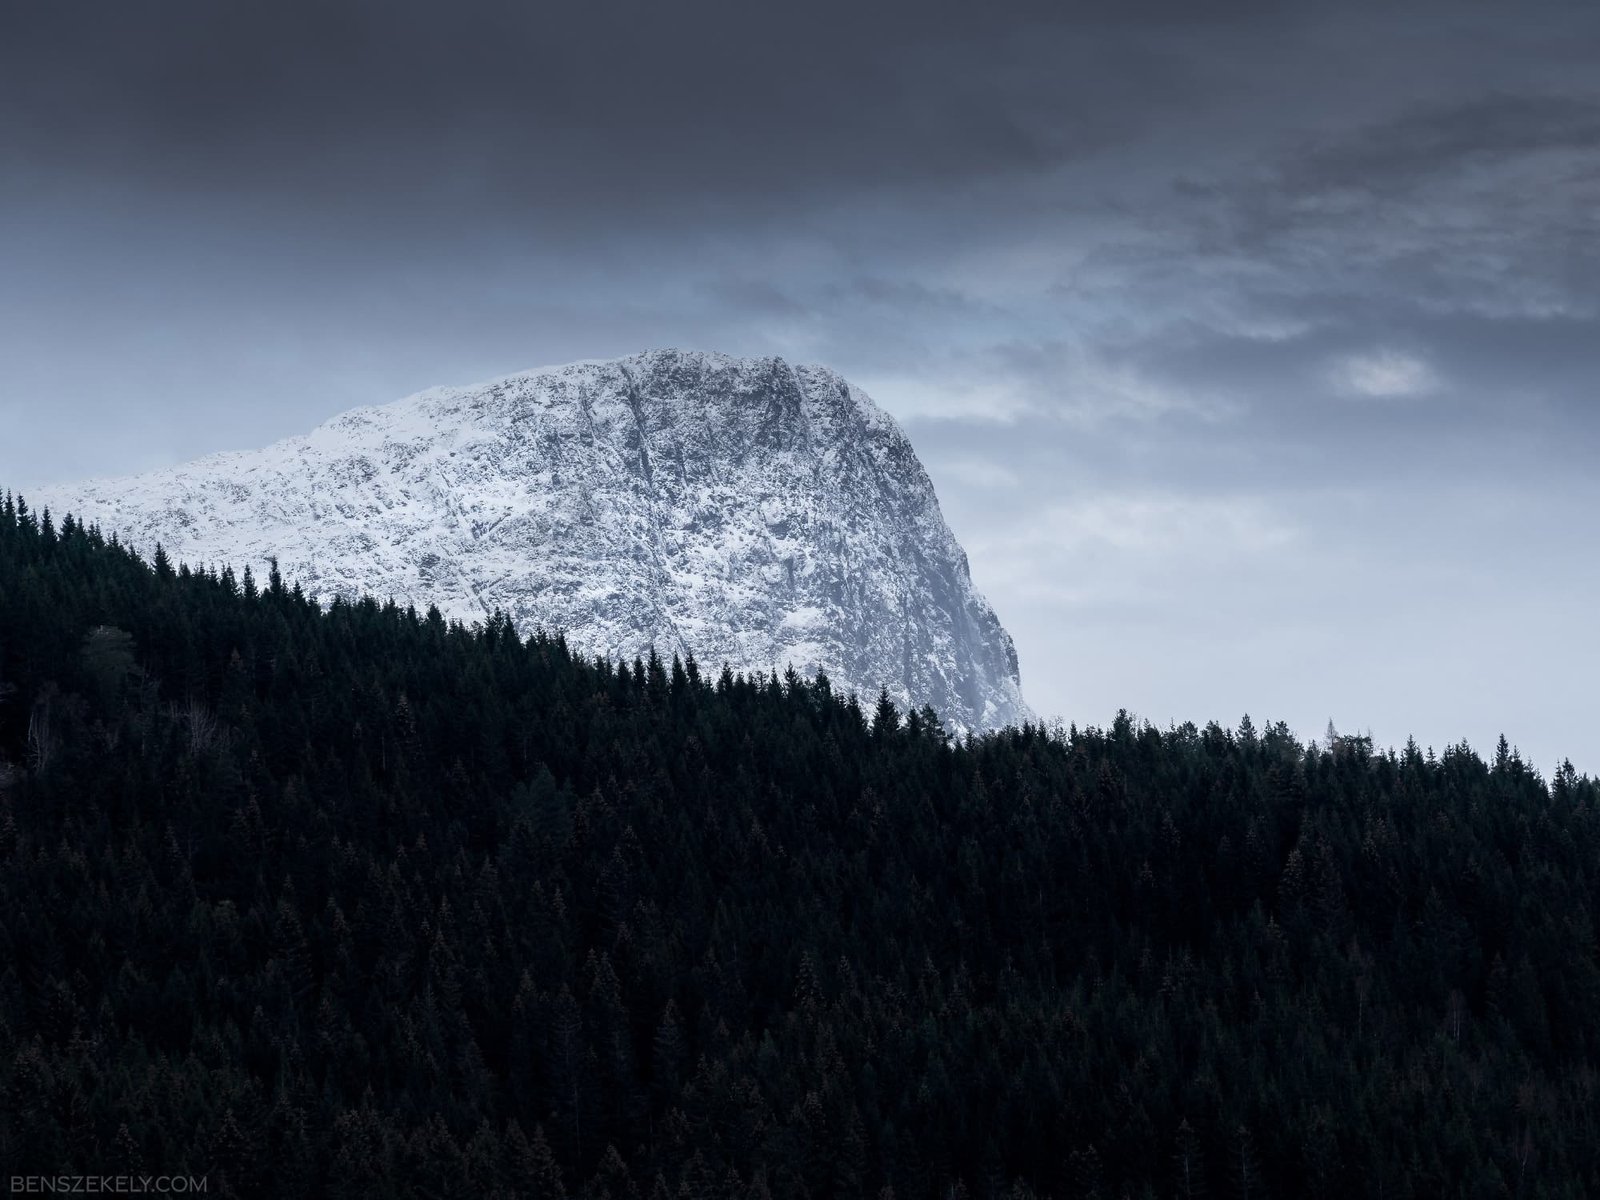 Landscape photograph of a huge snowy mountain behind a forest.